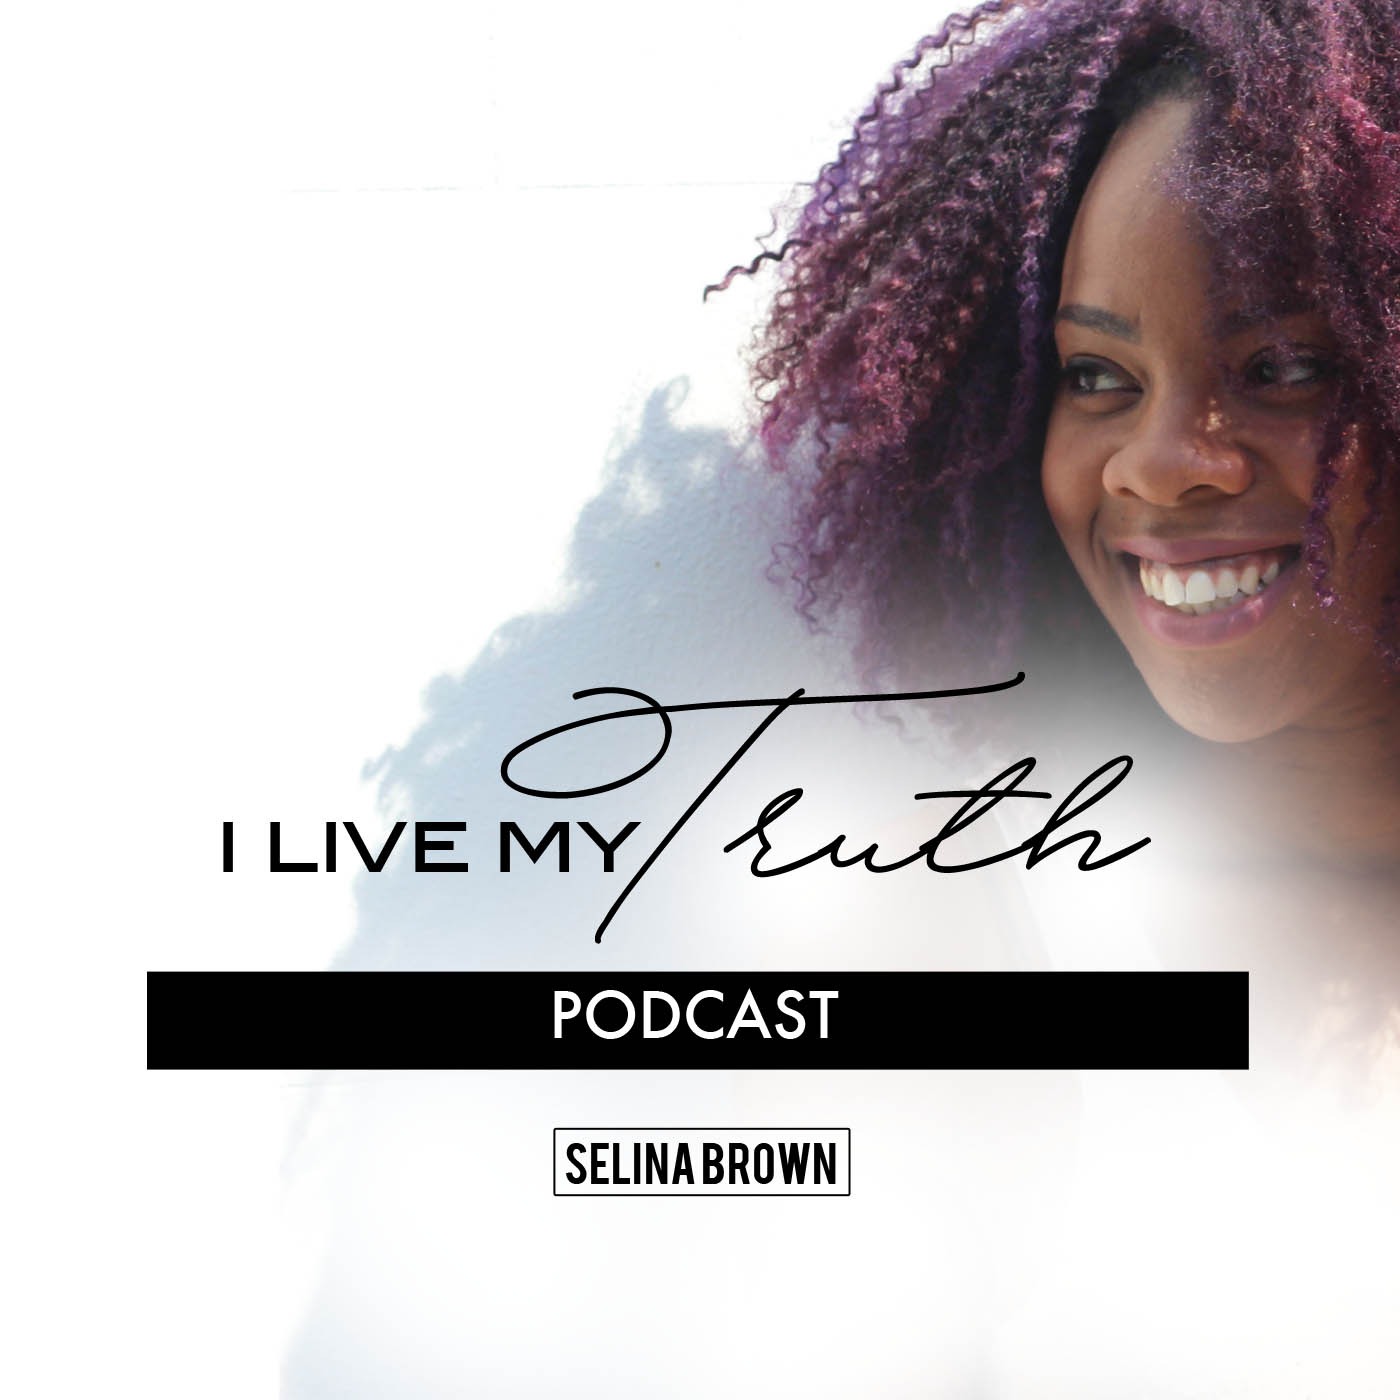 Episode 1: Live Your Truth